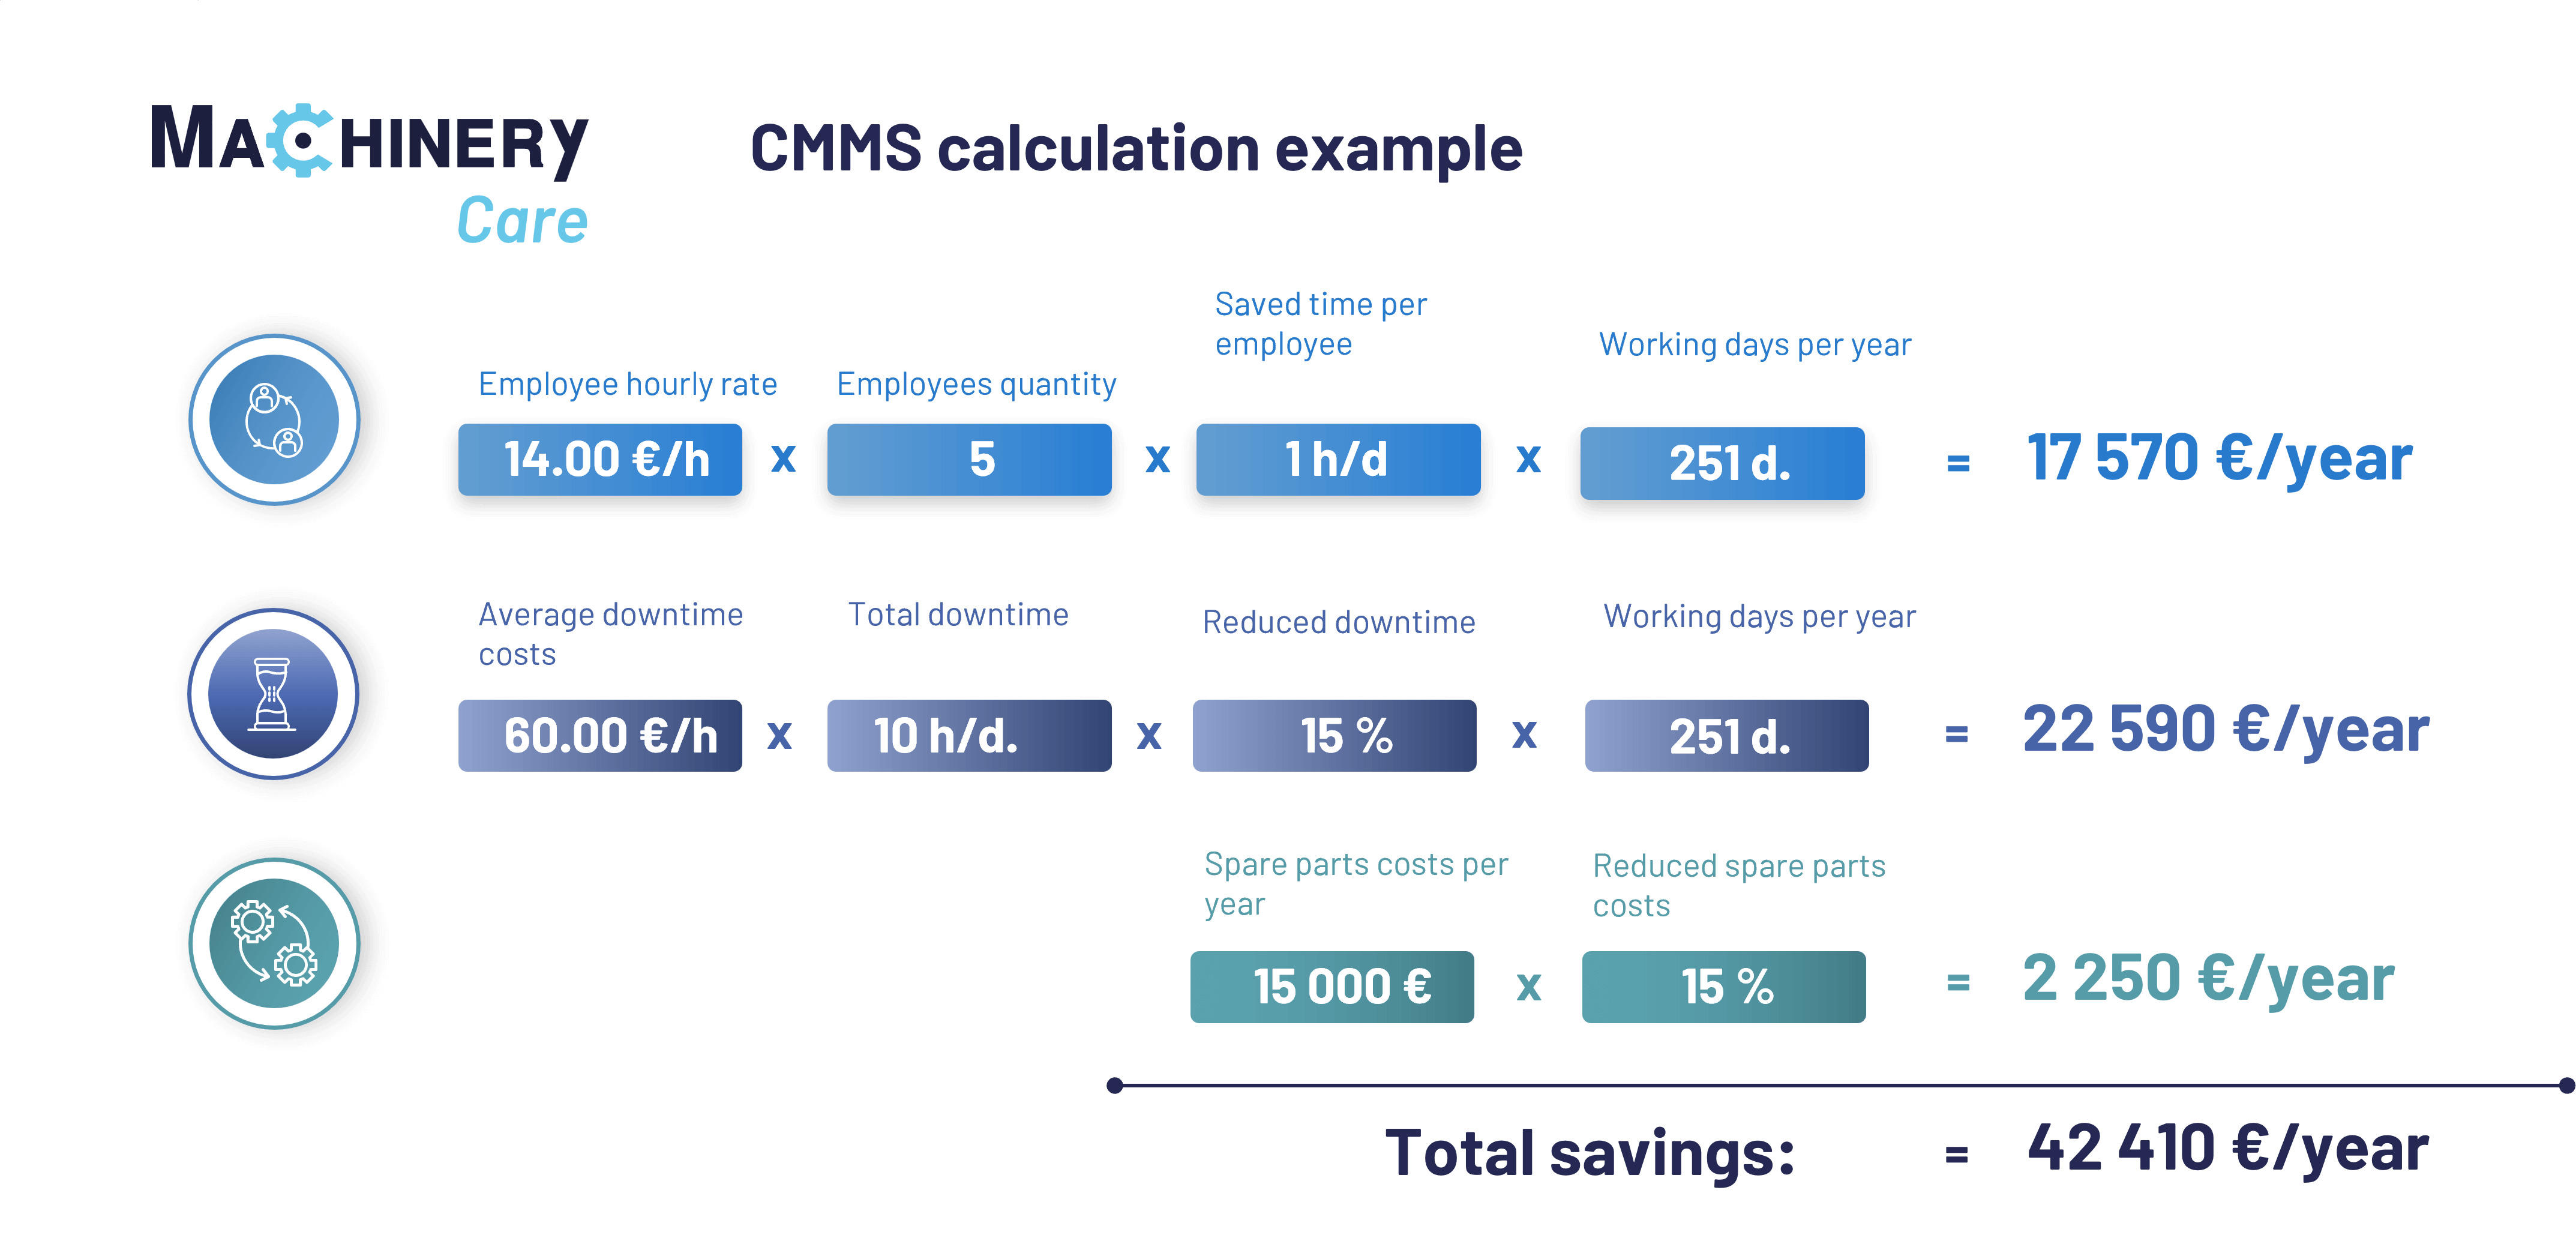 Machinery Care CMMS calculation example